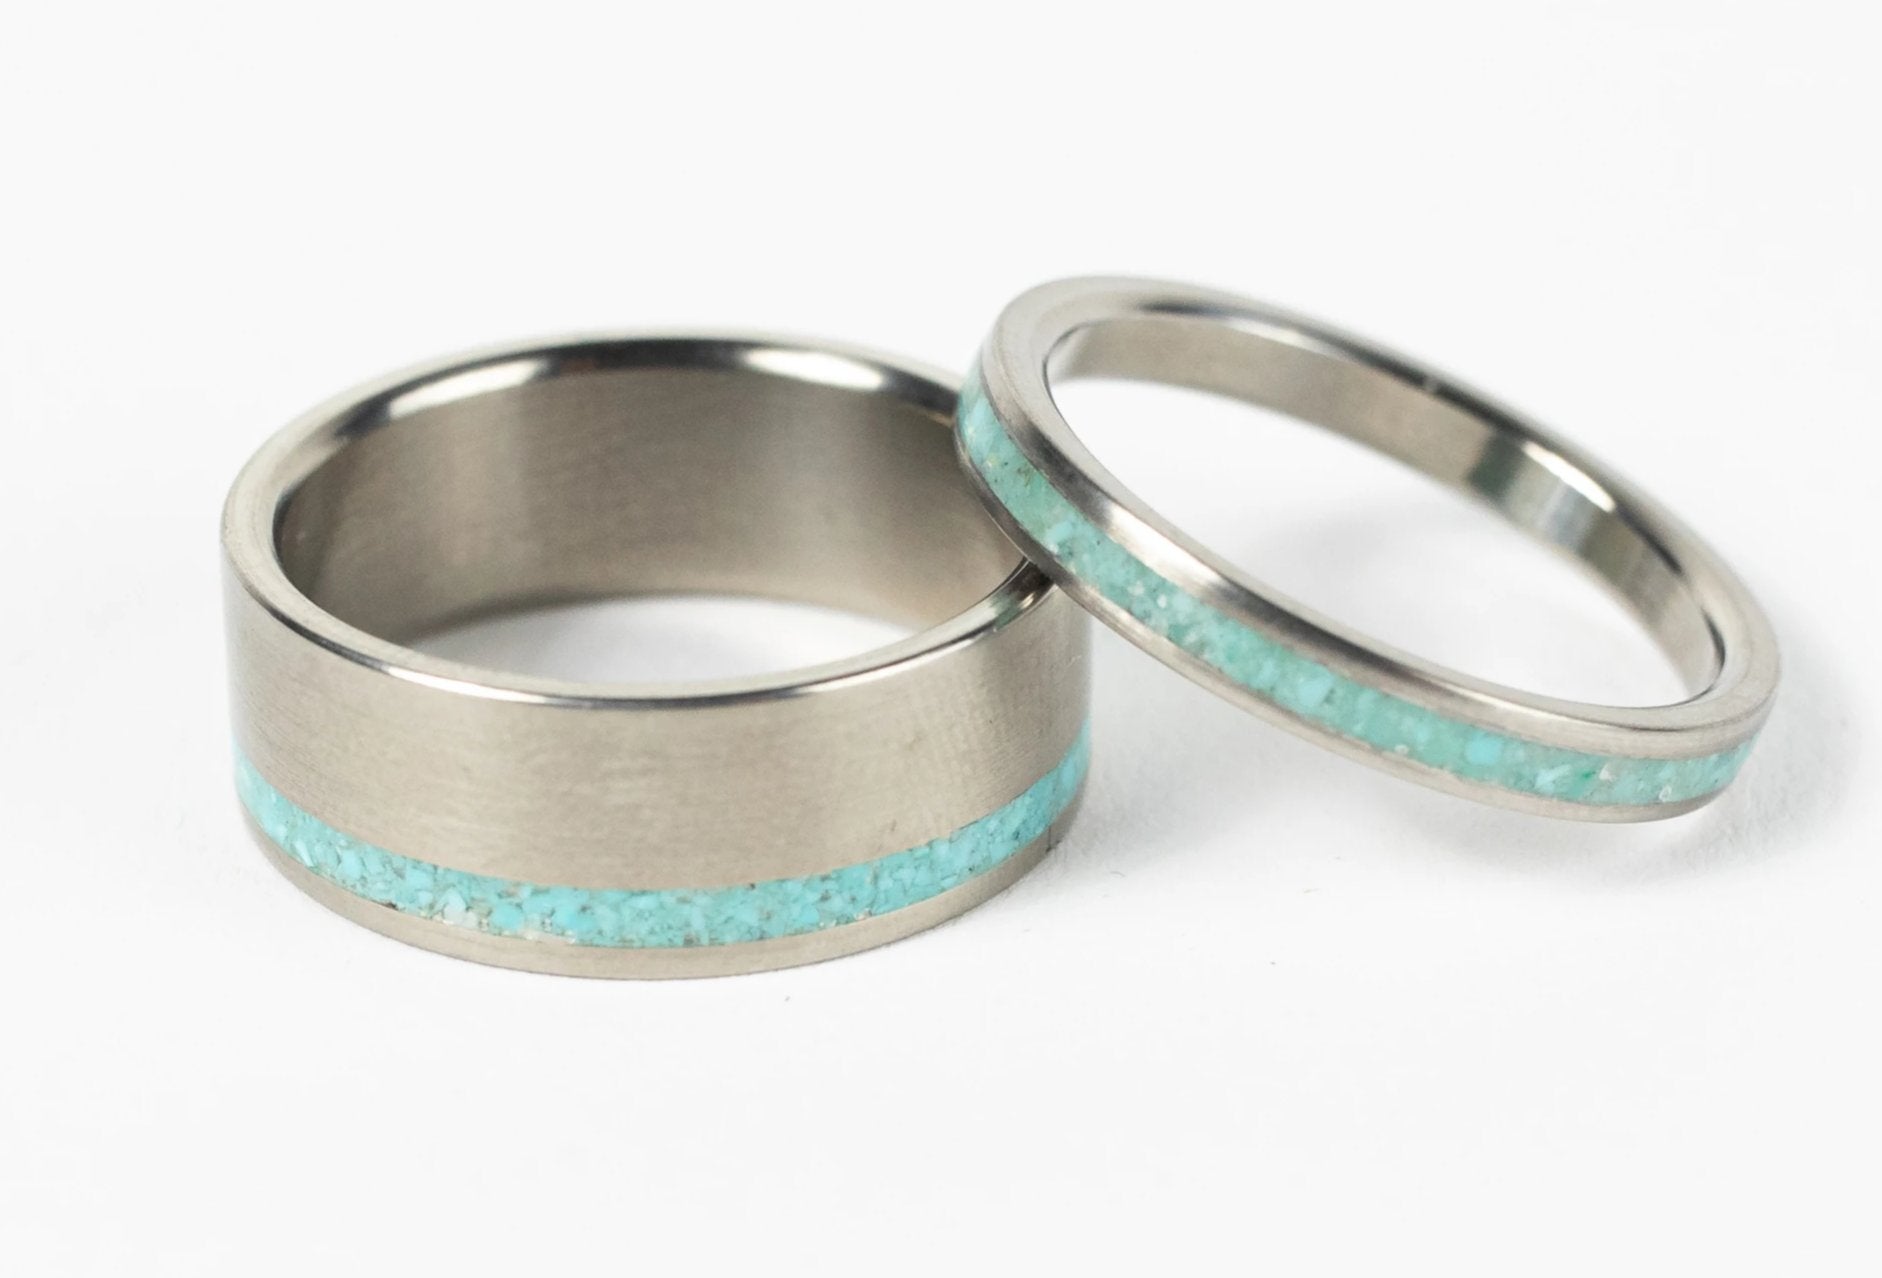 Turquoise his and hers wedding ring set